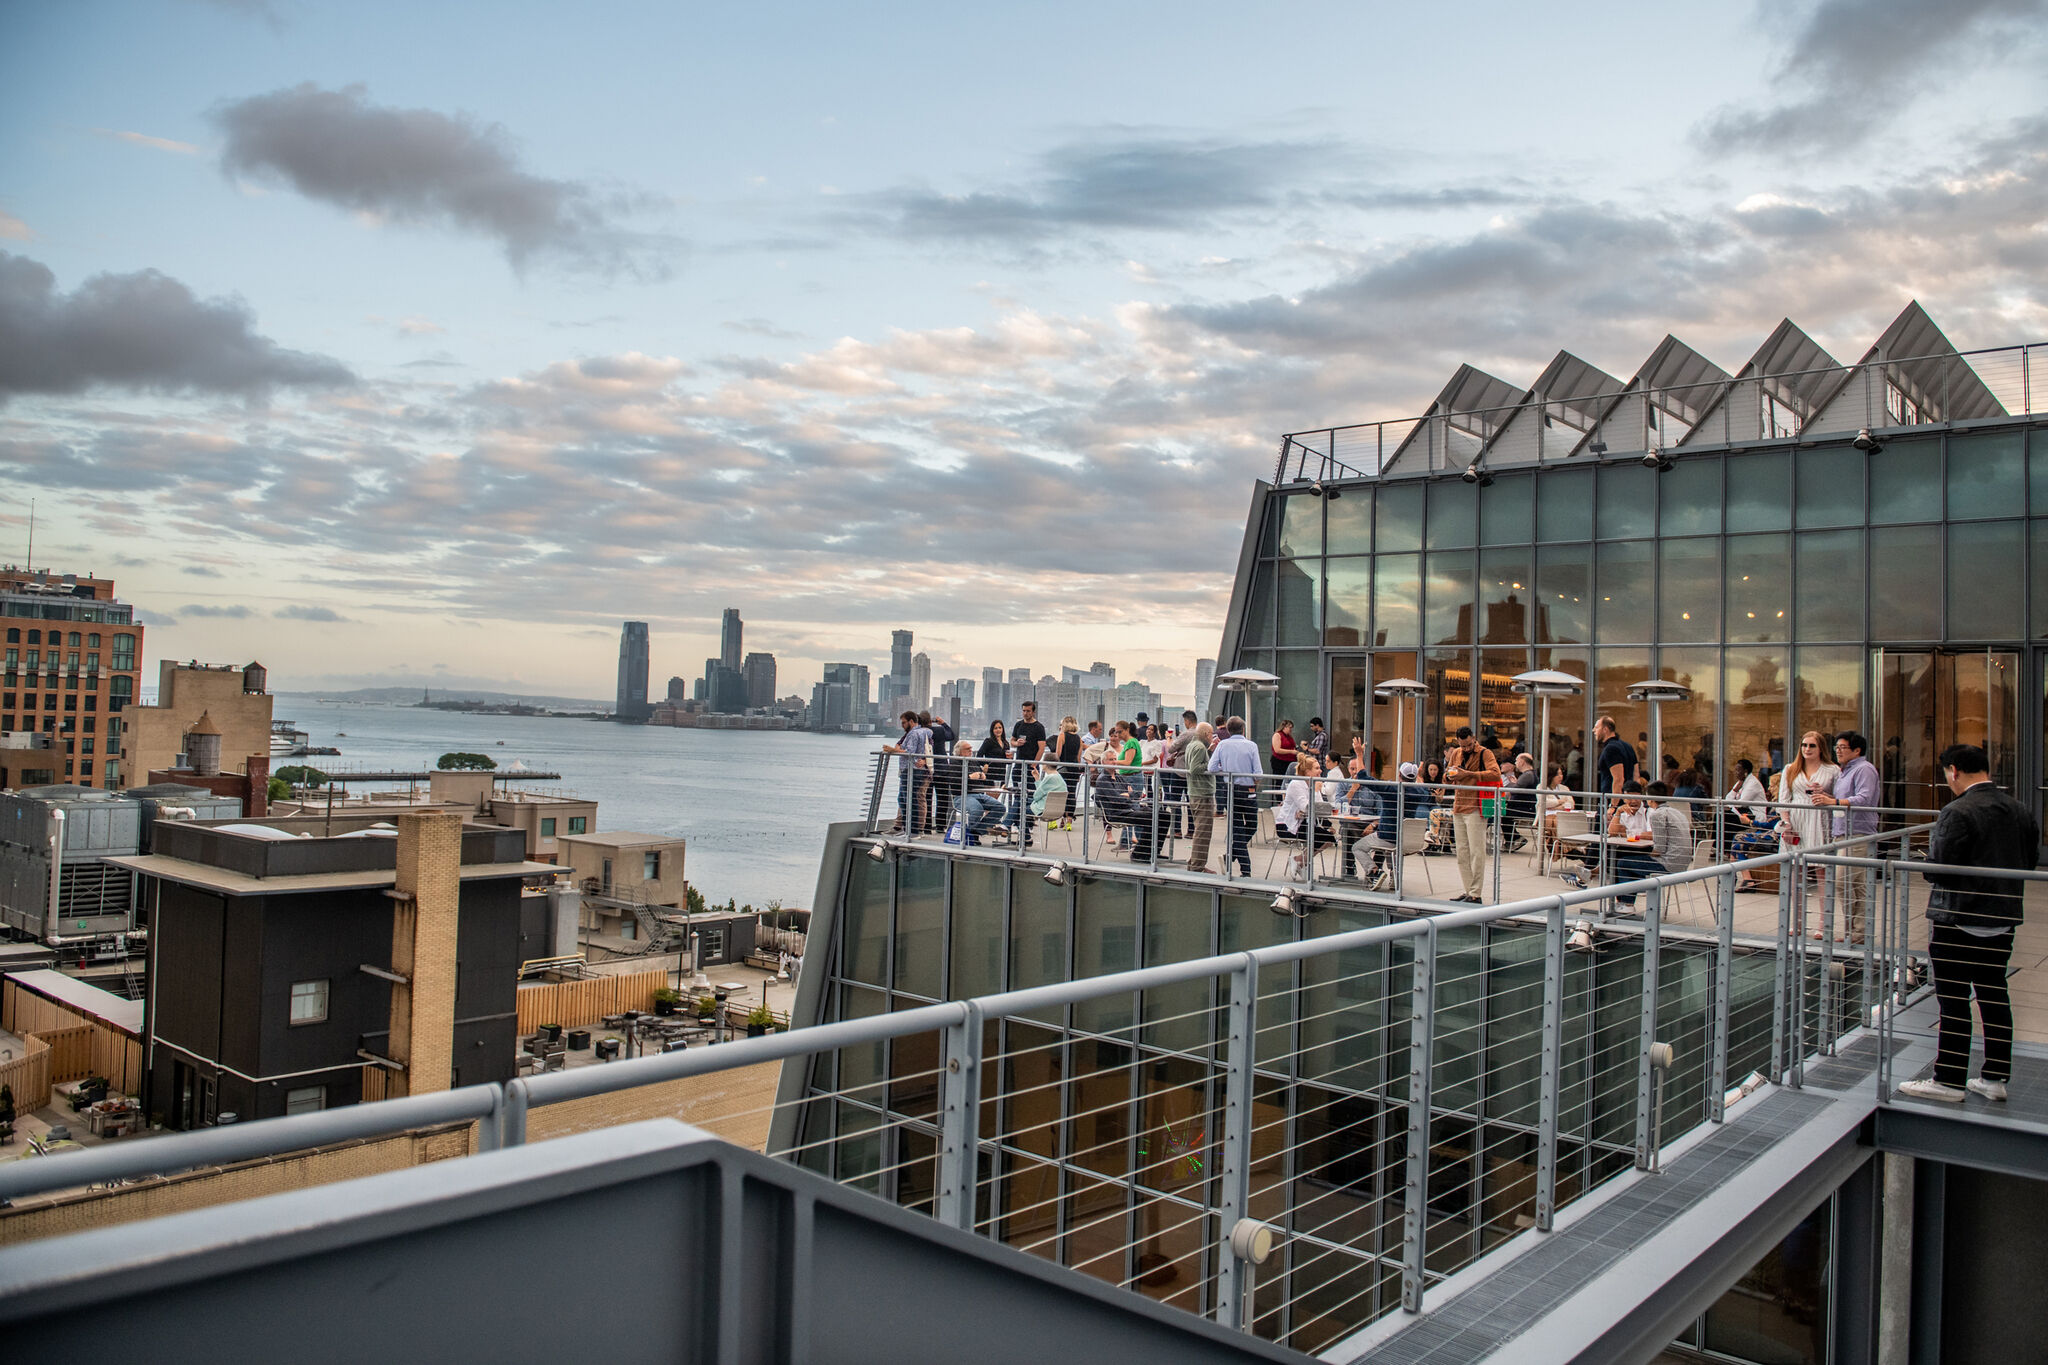 Exterior view of the Whitney Museum terrace at dusk with pink, blue, and gray clouds above the Hudson River and New Jersey skyline. Dozens of members mingle on the eighth floor terrace overlooking NYC.